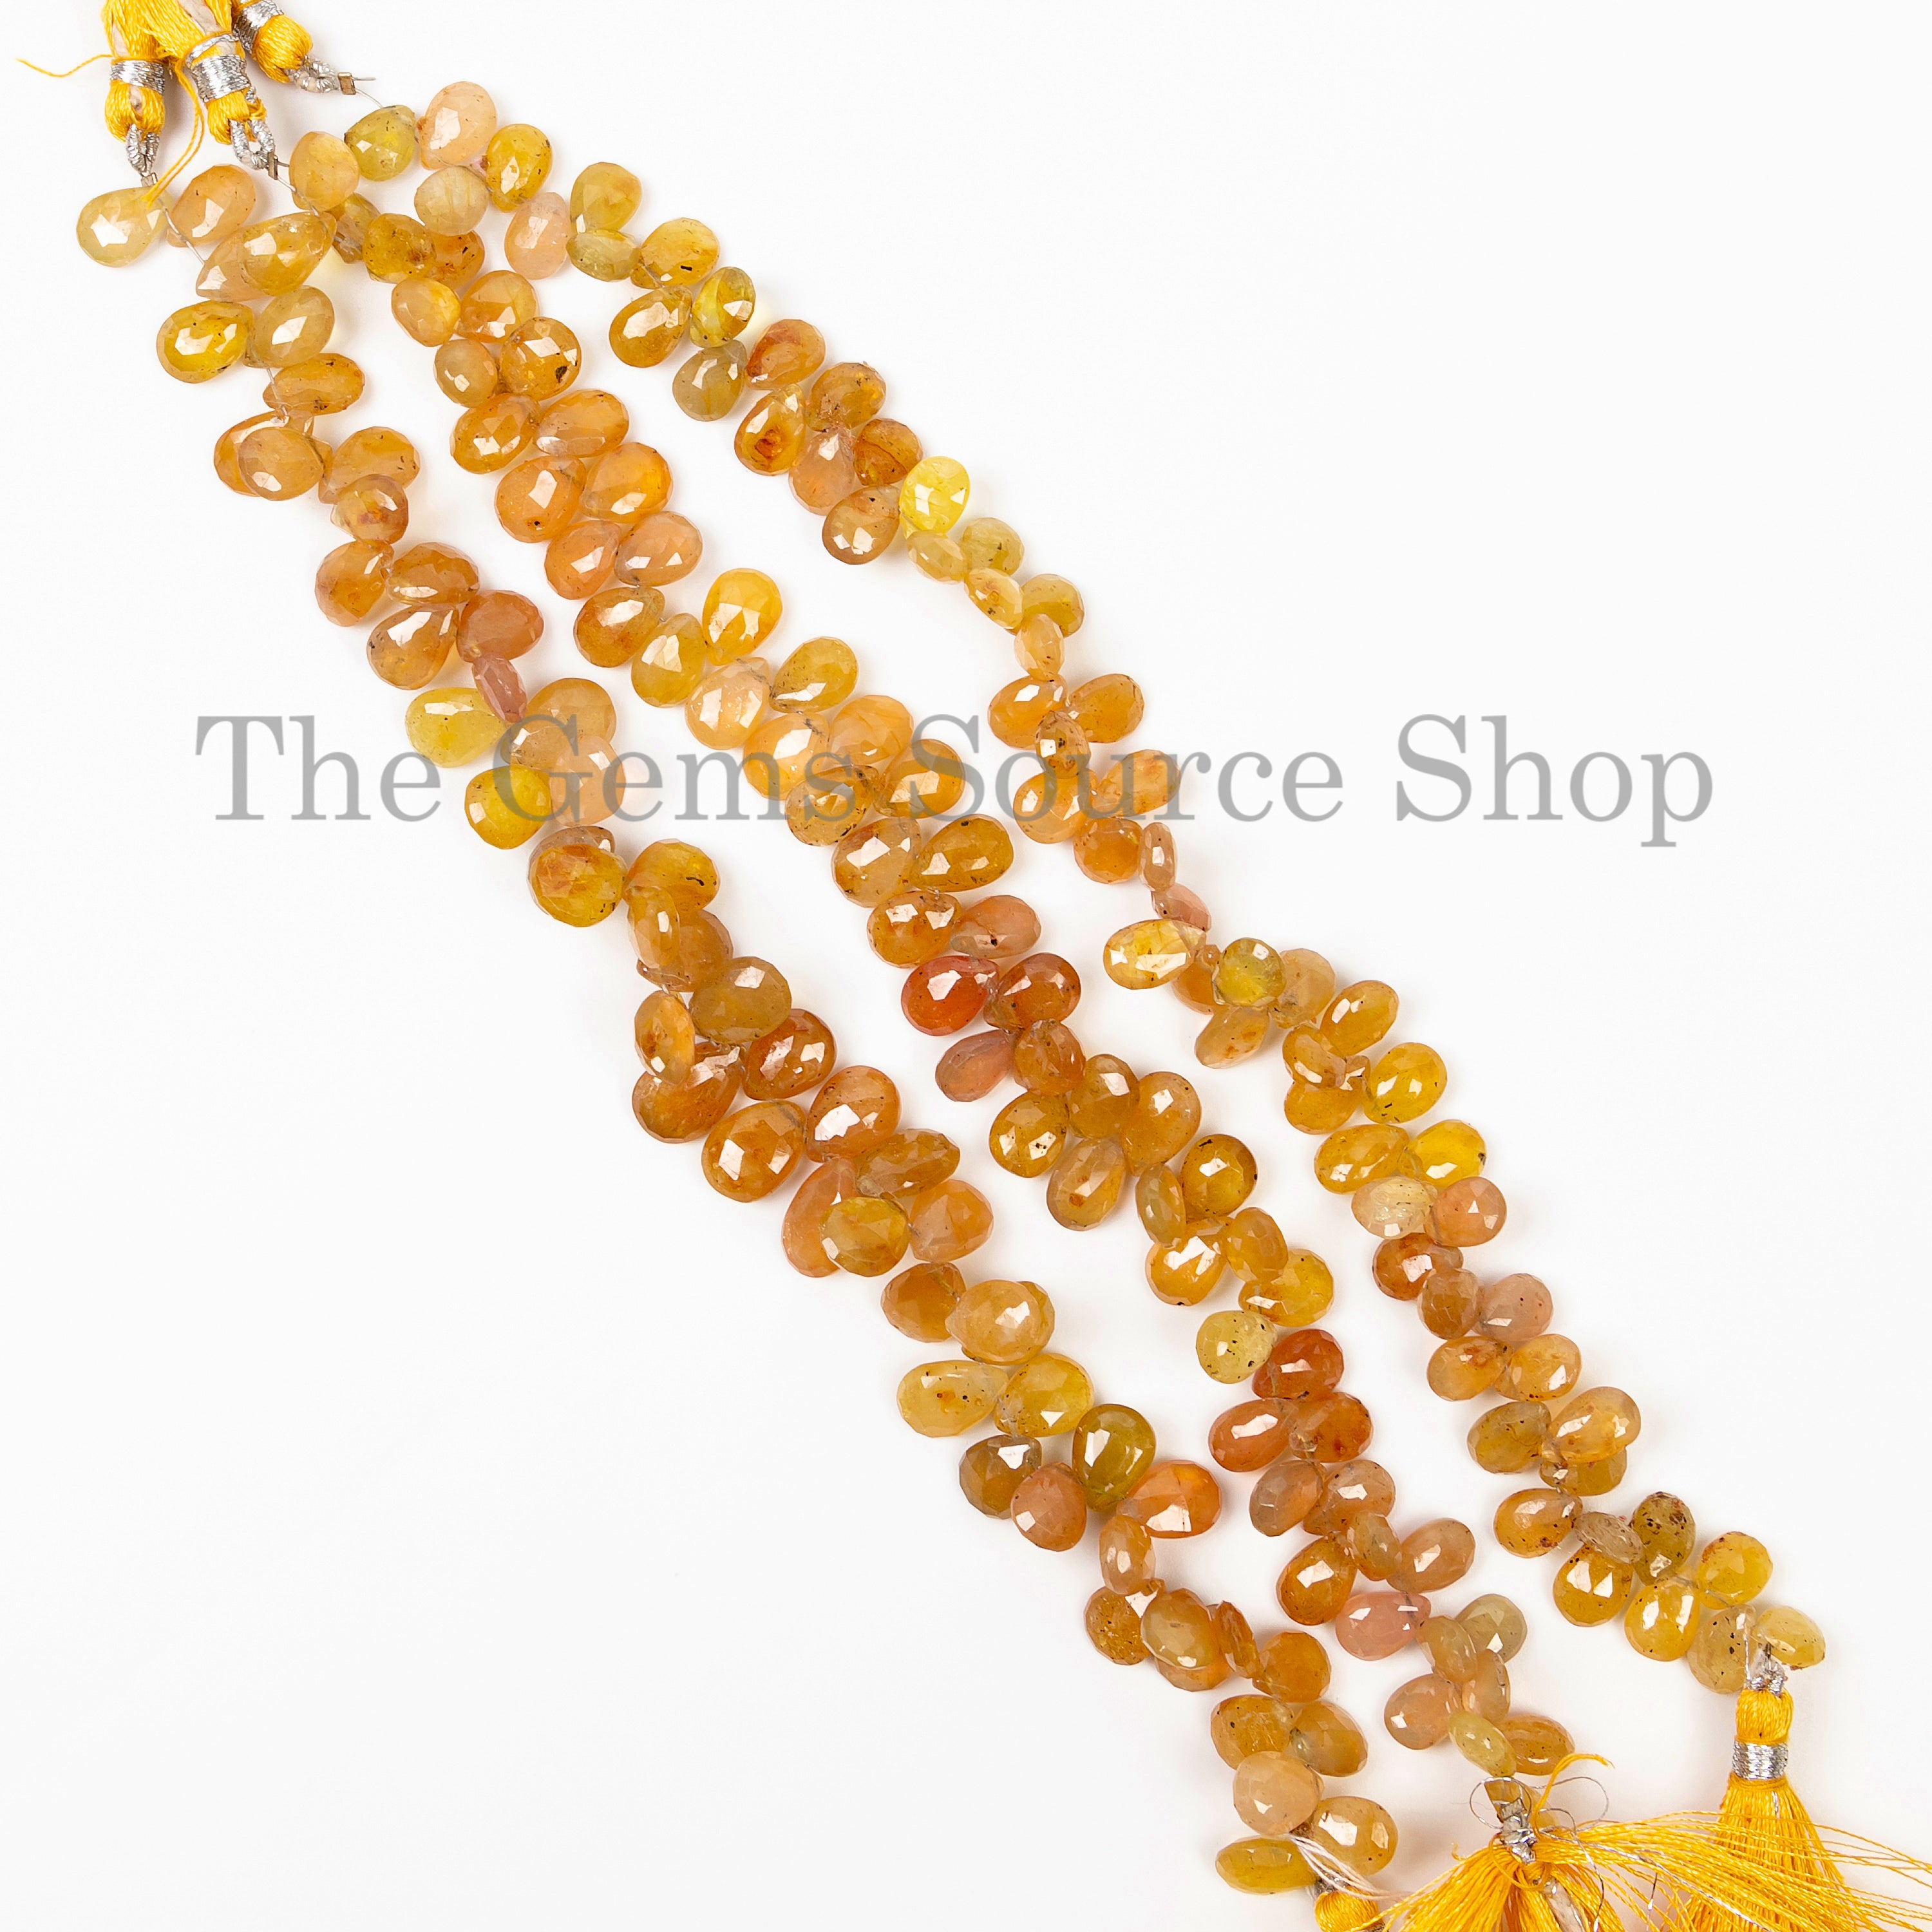 Yellow Sapphire Faceted Pear Beads, 6X8-8X11mm Natural Sapphire Pear Shape Beads for Jewelry Making. TGS-5049